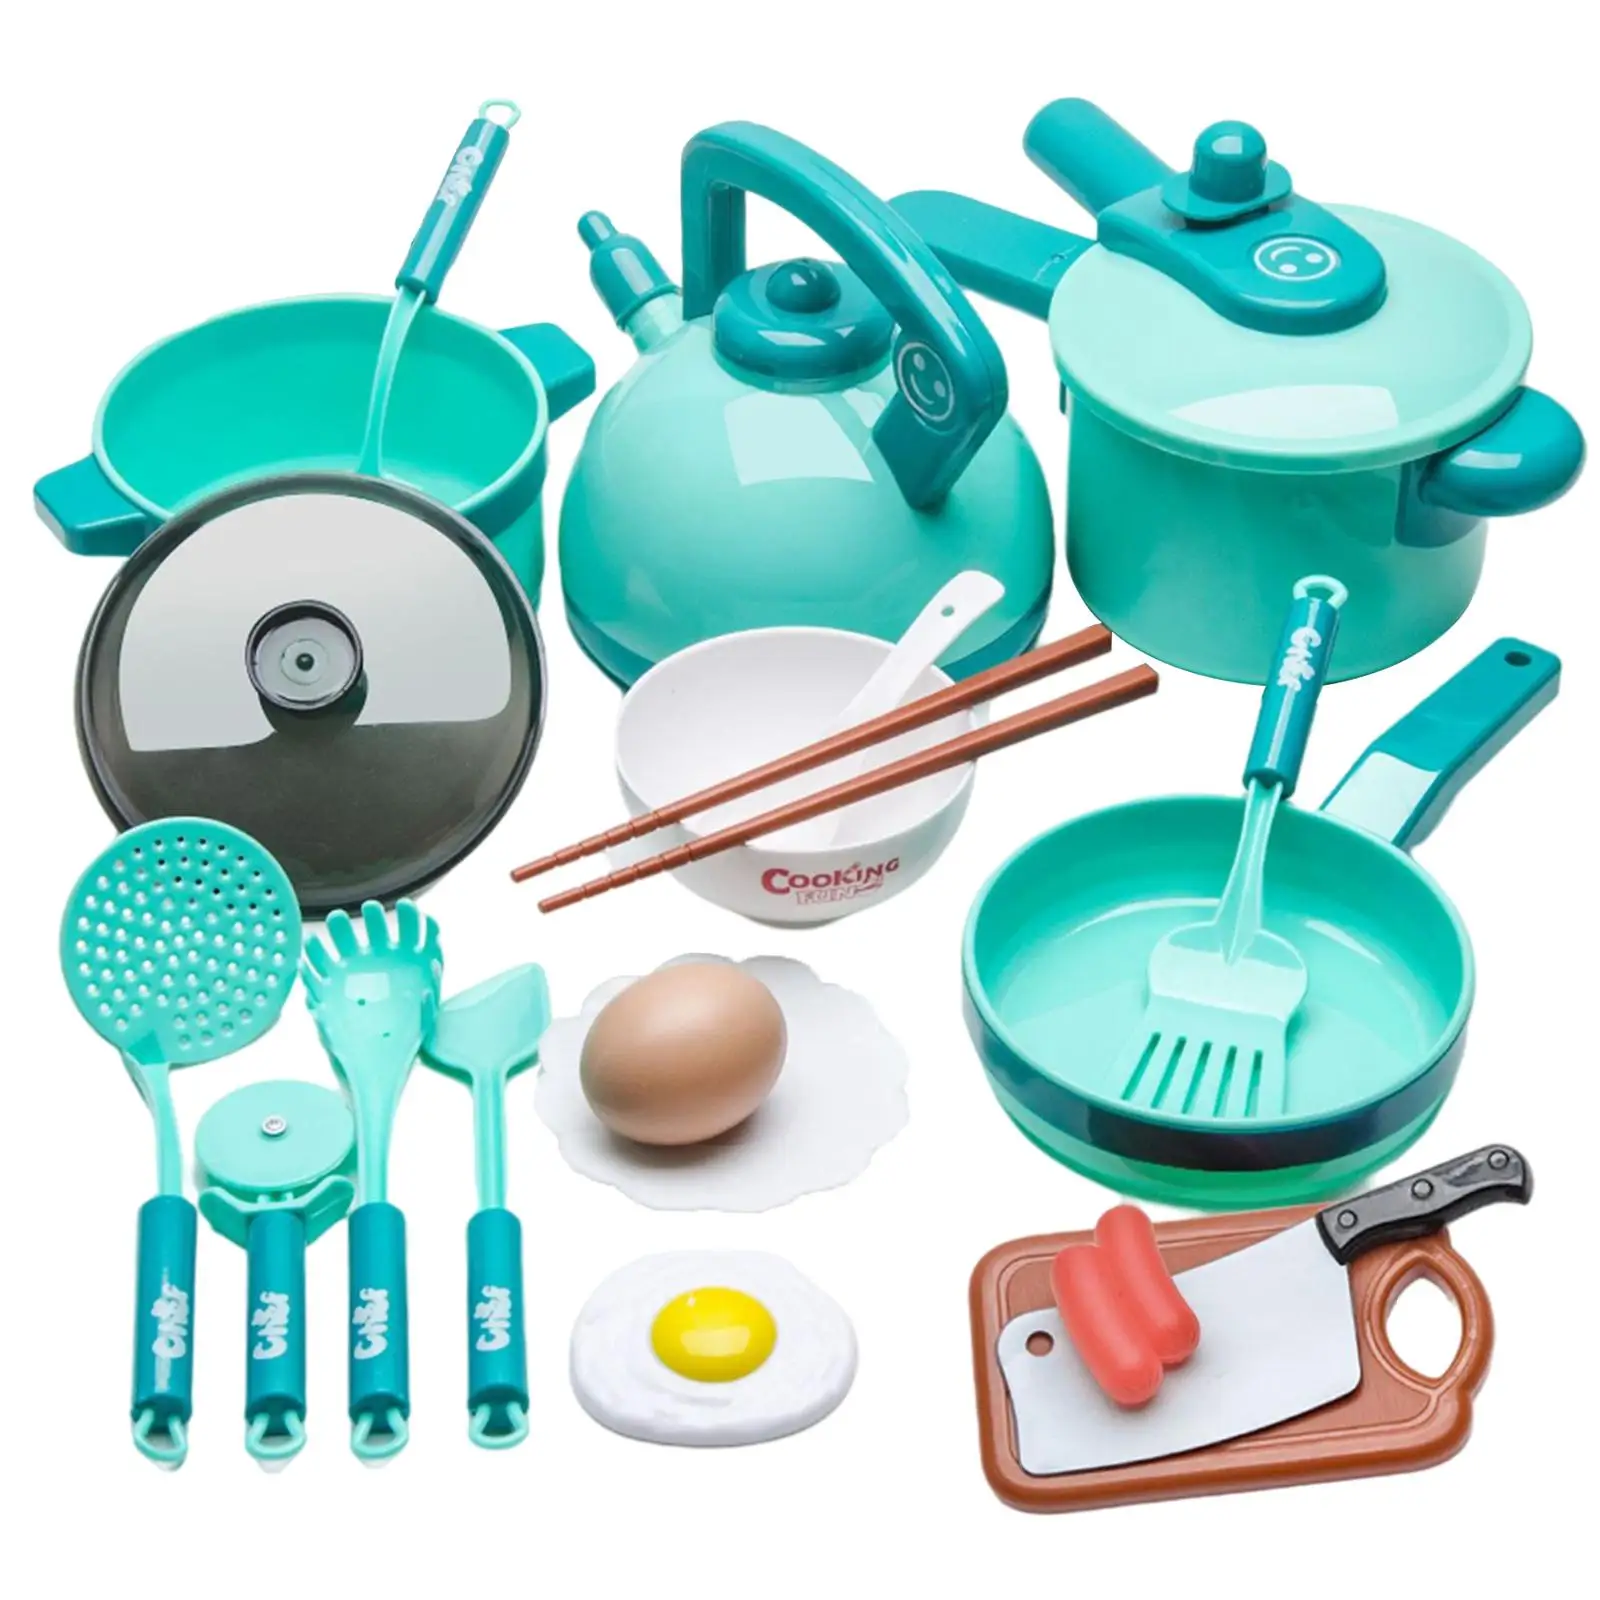 20Pcs/Set Kids Kitchen Pretend Play Pot and Pans Sets Toys Cookware Educational Toys for Toddlers Baby